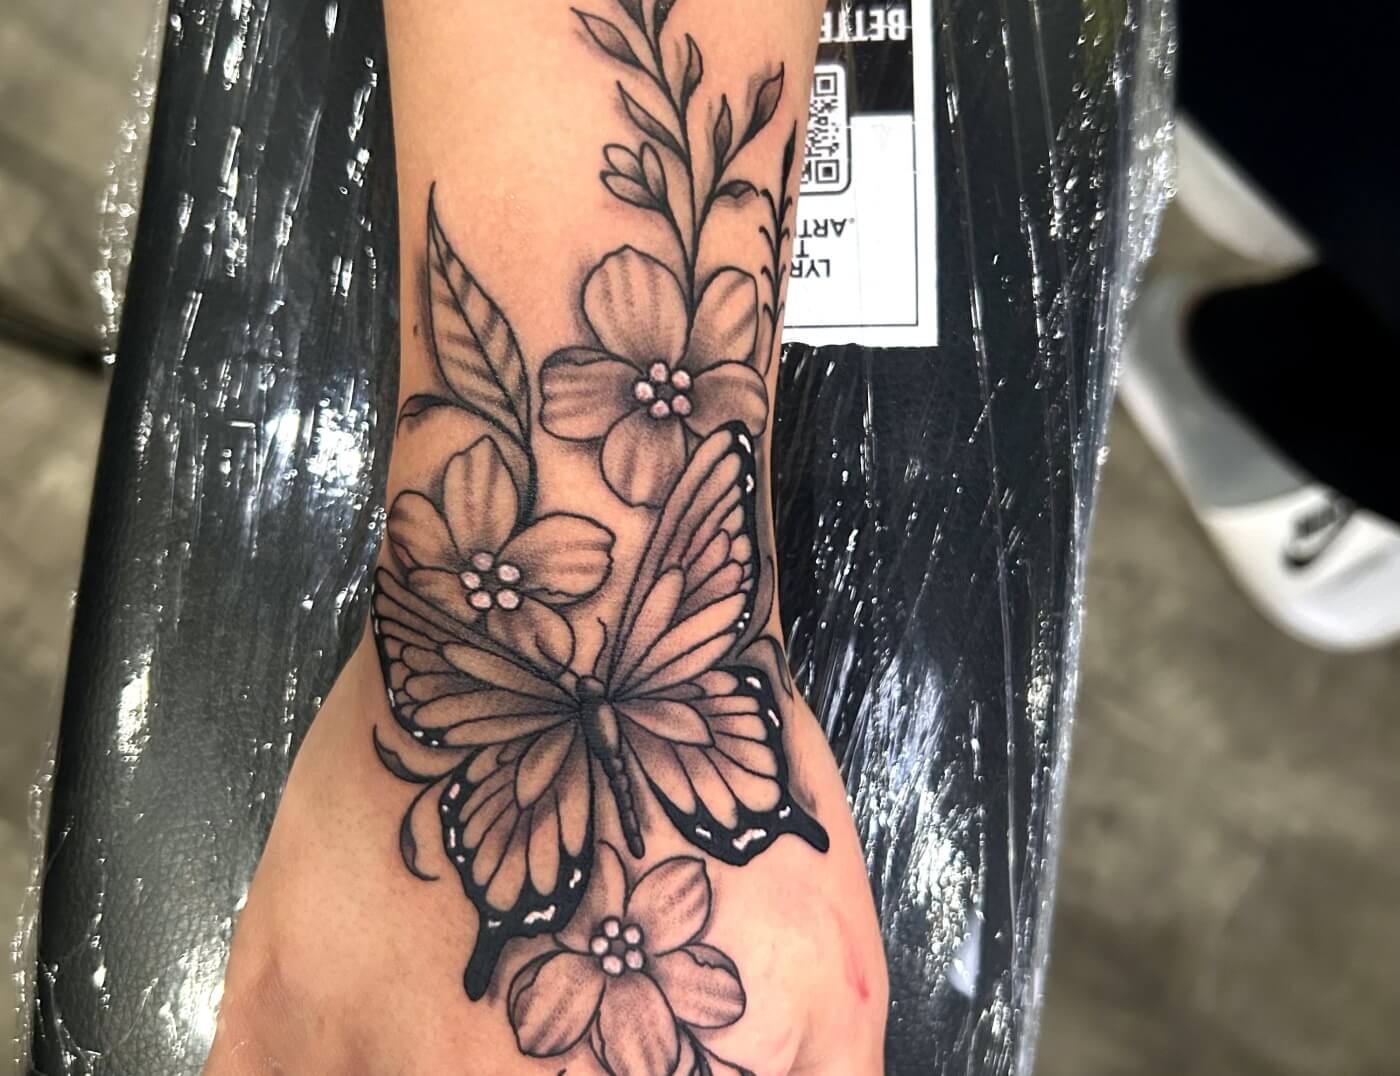 Butterfly among flowers tattoo in Black & Grey By Lyric TheArtist at Iron Palm Tattoos In Atlanta, Georgia. Butterflies and flowers complement each other aesthetically in the real world and in art. The delicate, colorful nature of butterflies can be enhanced by the addition of vibrant, detailed flowers. Additionally, butterflies and flowers are often associated with spring and renewal. Call 404-973-7828 or stop by for a free consultation with Lyric or another Iron Palm Tattoo body artist. Walk-ins are welcome.